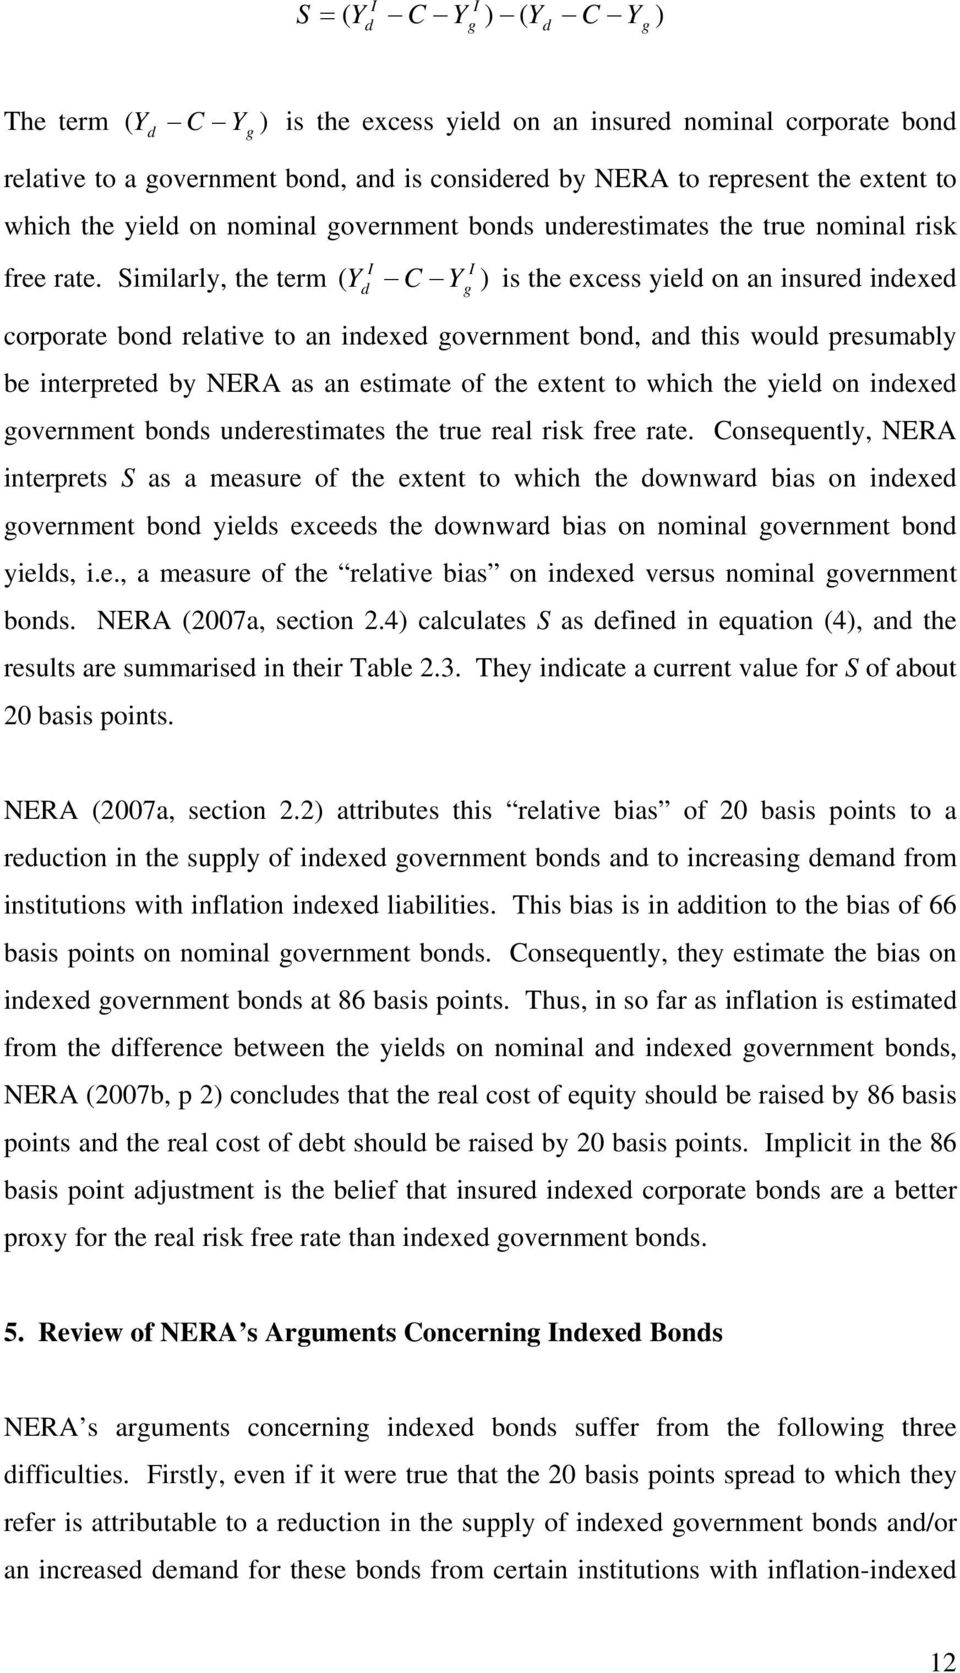 Similarly, the term ( Y I d C Y I g ) is the excess yield on an insured indexed corporate bond relative to an indexed government bond, and this would presumably be interpreted by NERA as an estimate